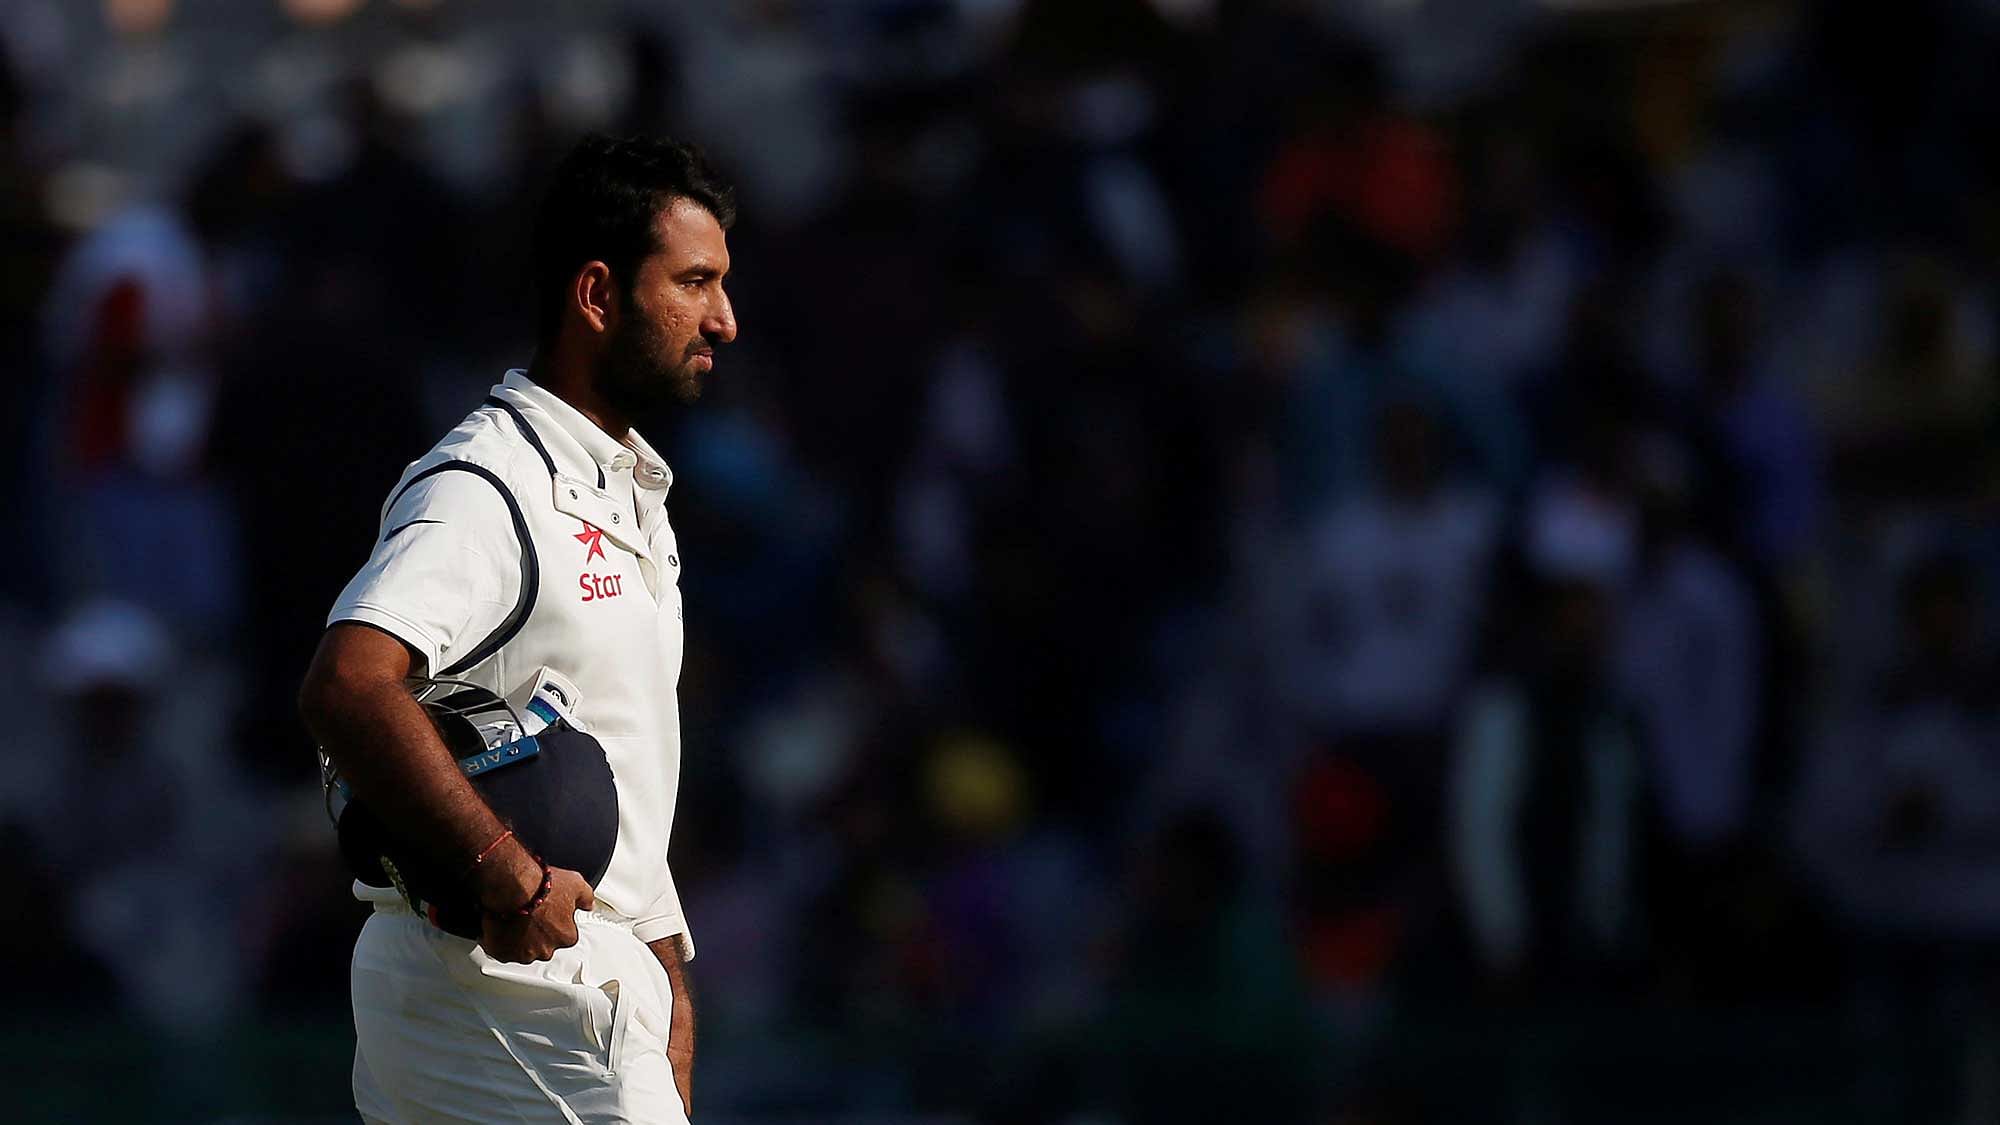 Cheteshwar Pujara, one of the most integral parts of India’s current Test team, did not find a buyer in the IPL auction. (Photo: Reuters)